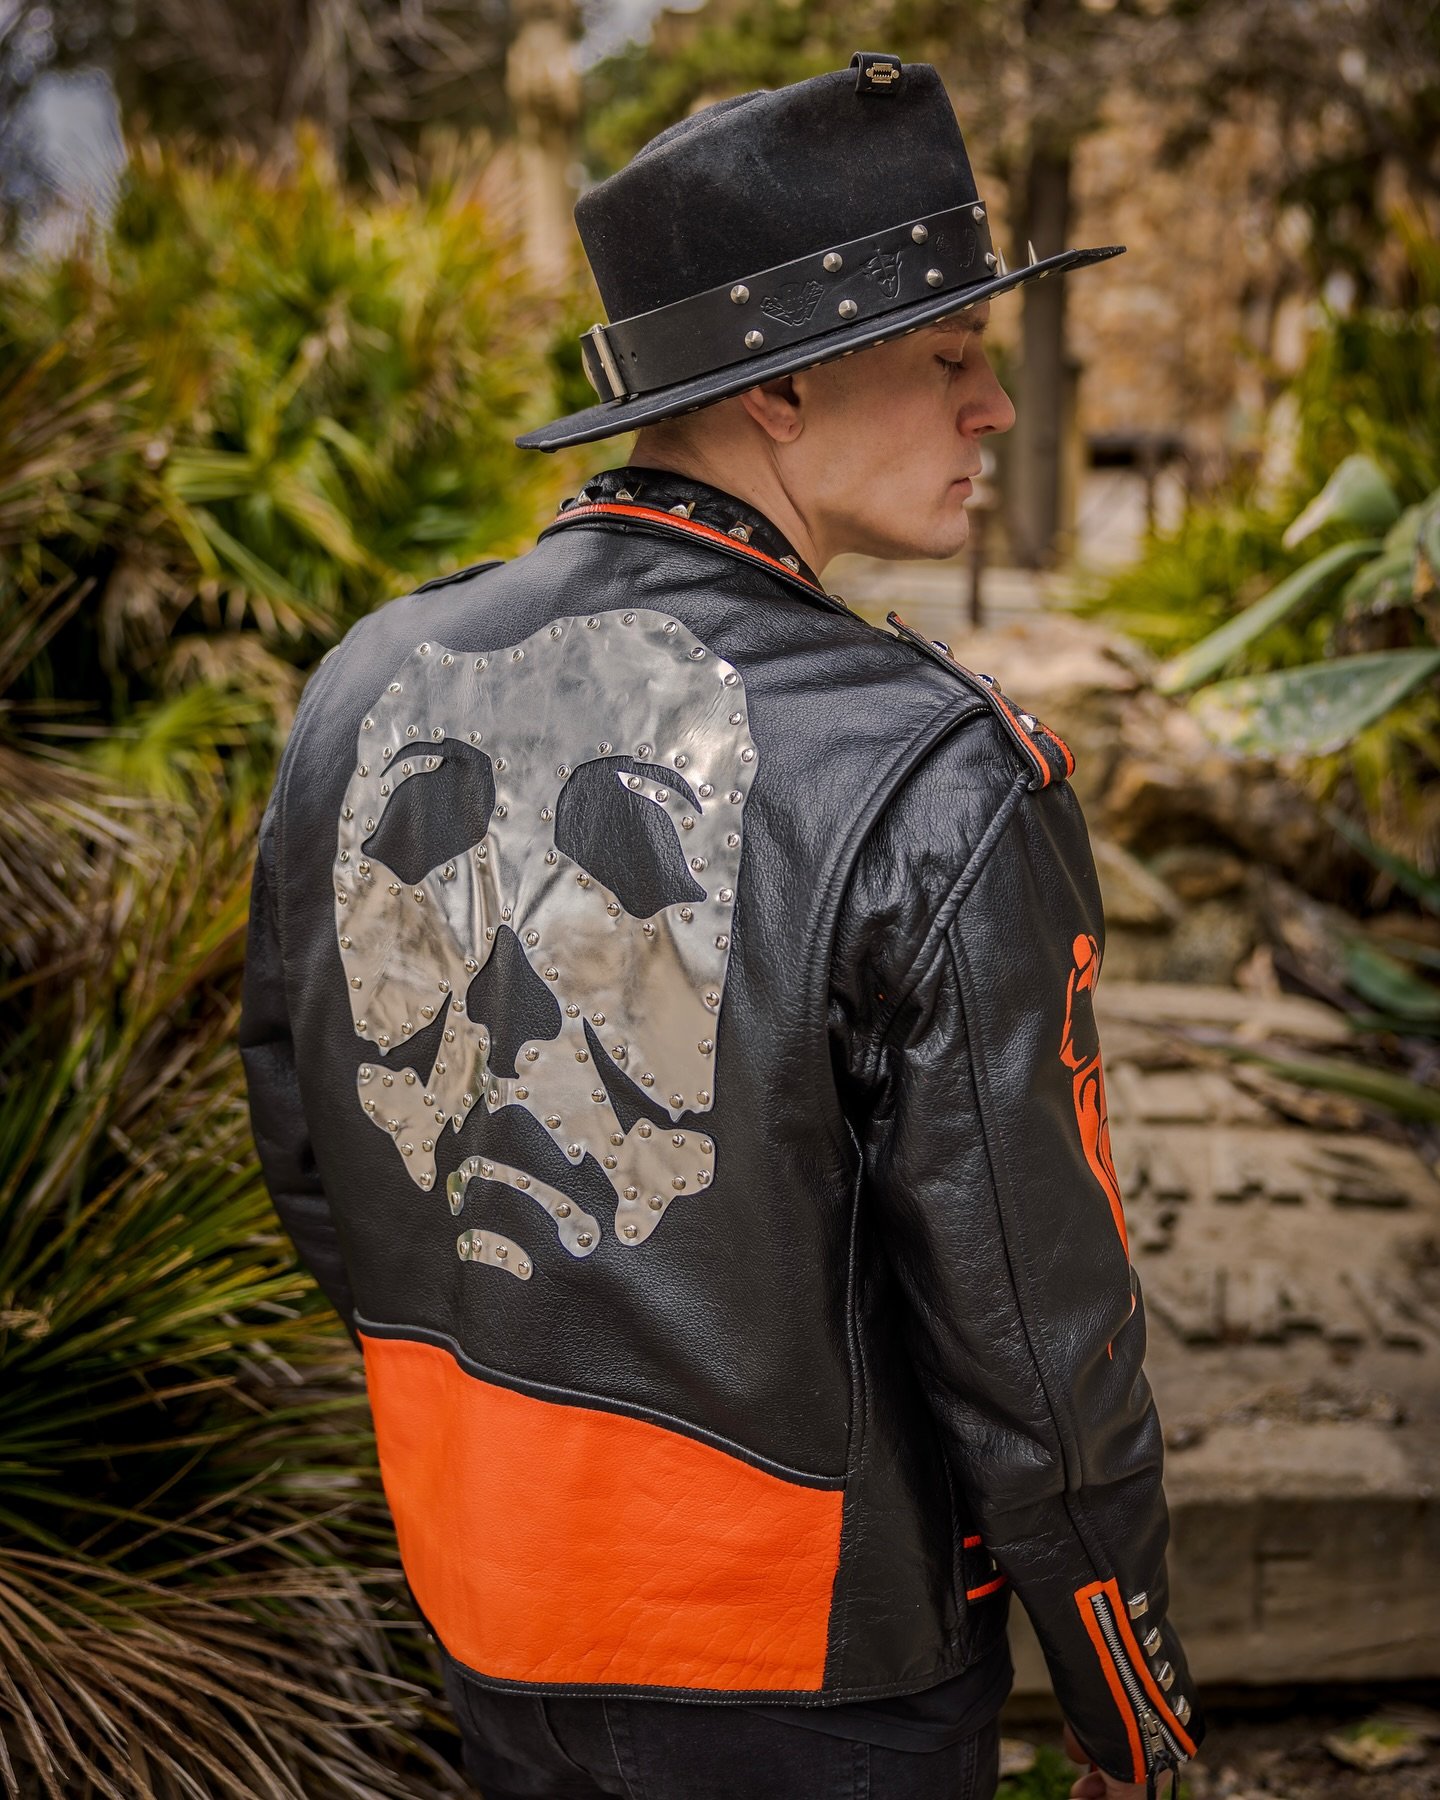 Hey Creeps, how&rsquo;s your week going so far?

More of Me Mooching around Montju&iuml;c with @criscalvente_videography 🎃

1/1 &lsquo;HALLOWEEN&rsquo; Jacket available now on my website, hat is from my collab with @blade_hats 🤌🏼

If you want to d